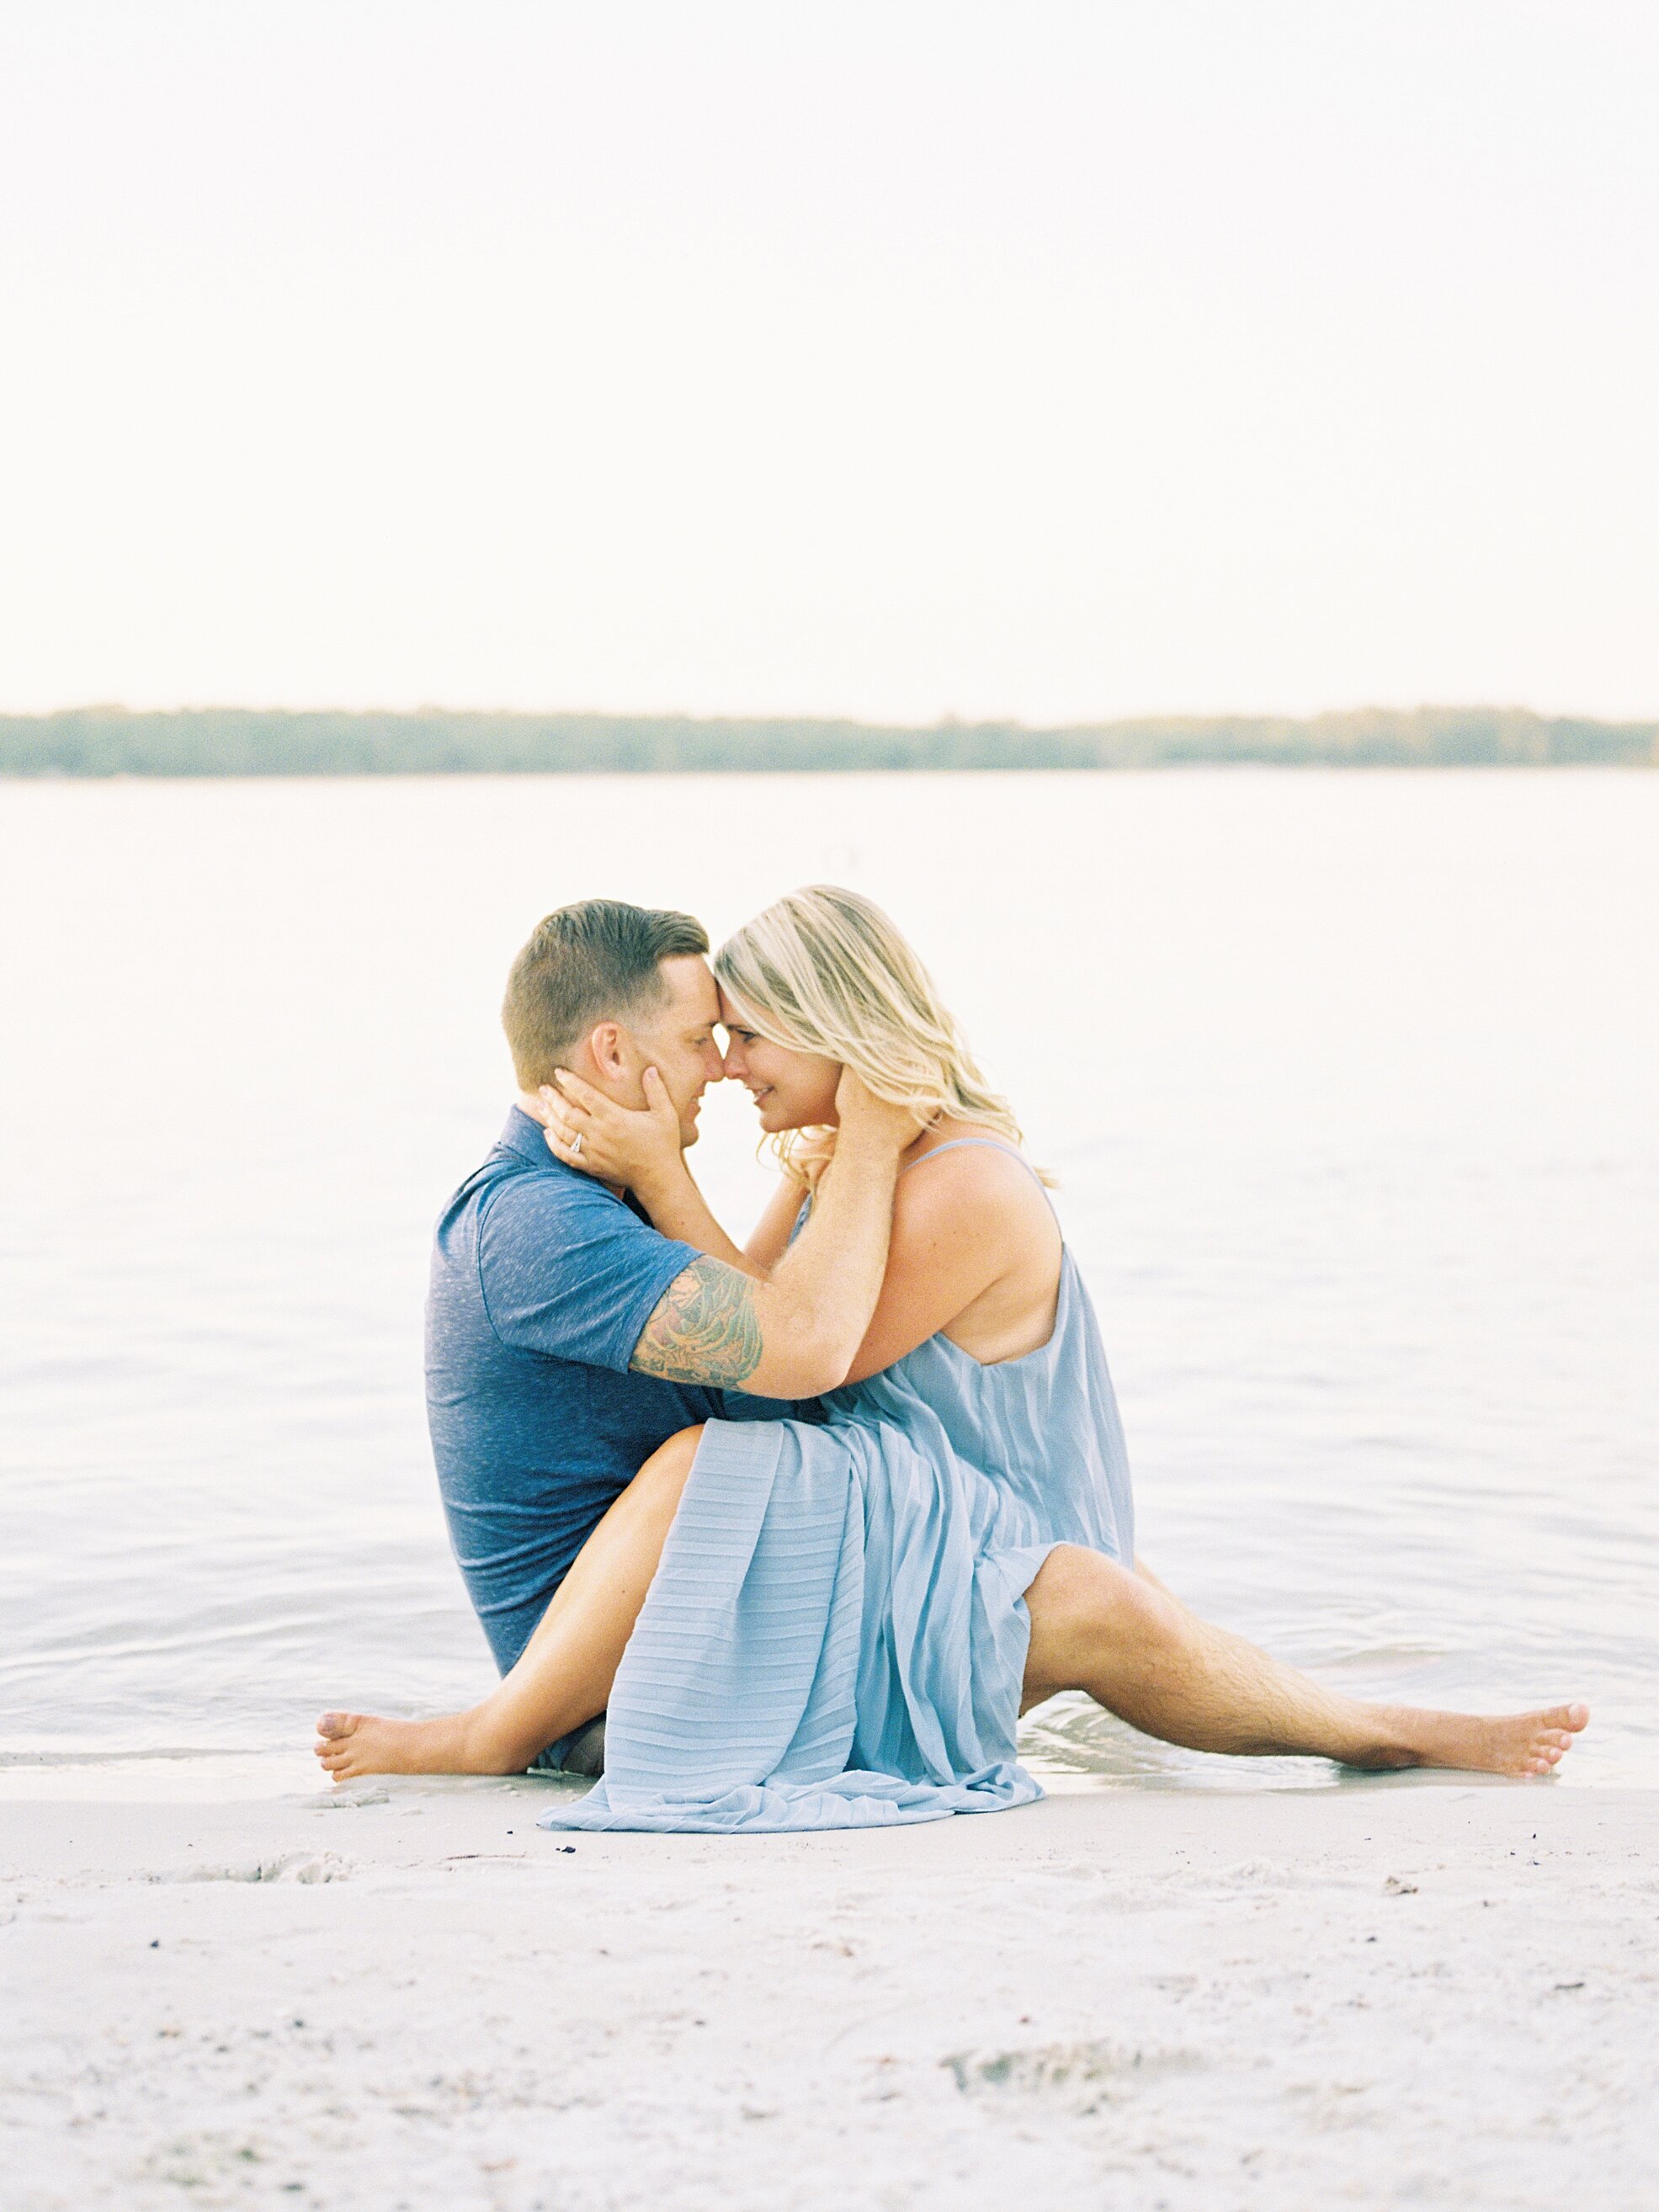 Lake House Engagement Session in Keystone Heights- Jacksonville, St. Augustine, Ponte Vedra Beach, Amelia Island, Florida Fine Art Film Wedding and Lifestyle Photography_0047a.jpg